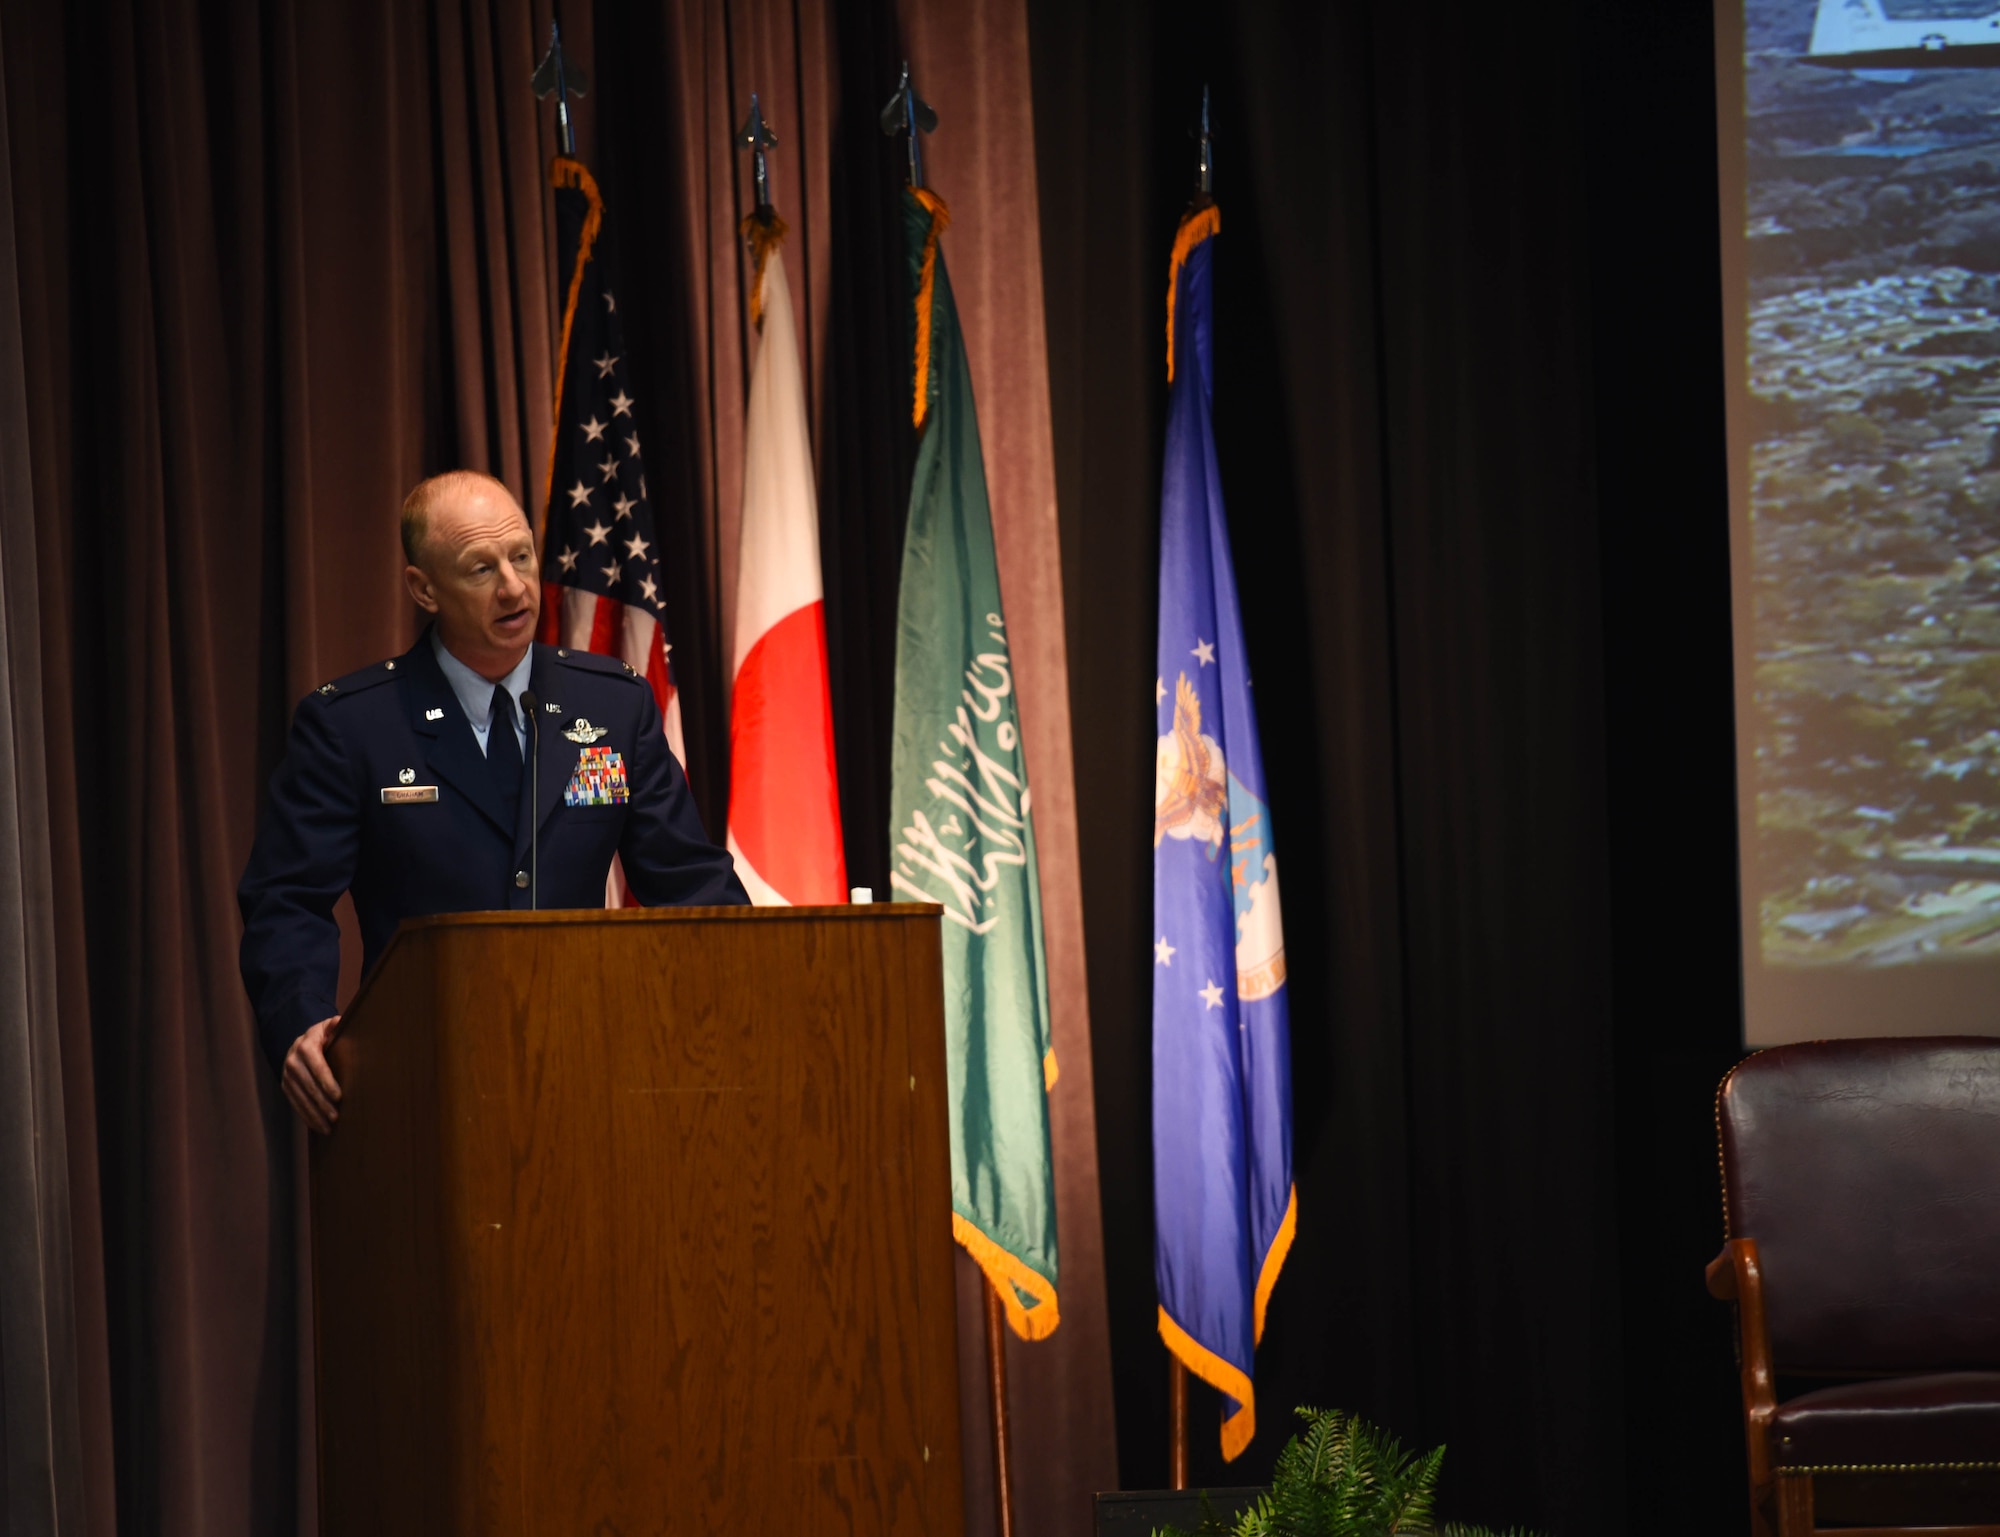 Col. Seth Graham, 14th Flying Training Wing commander, speaks to Specialized Undergraduate Pilot Training Class 20-20/21 at their graduation ceremony on August 7, 2020, at Columbus Air Force Base, Miss.  Thirty-four officers were awarded their silver wings at the ceremony and gained the title of “Air Force Pilot”. (U.S. Air Force photo by Senior Airman Jake Jacobsen)